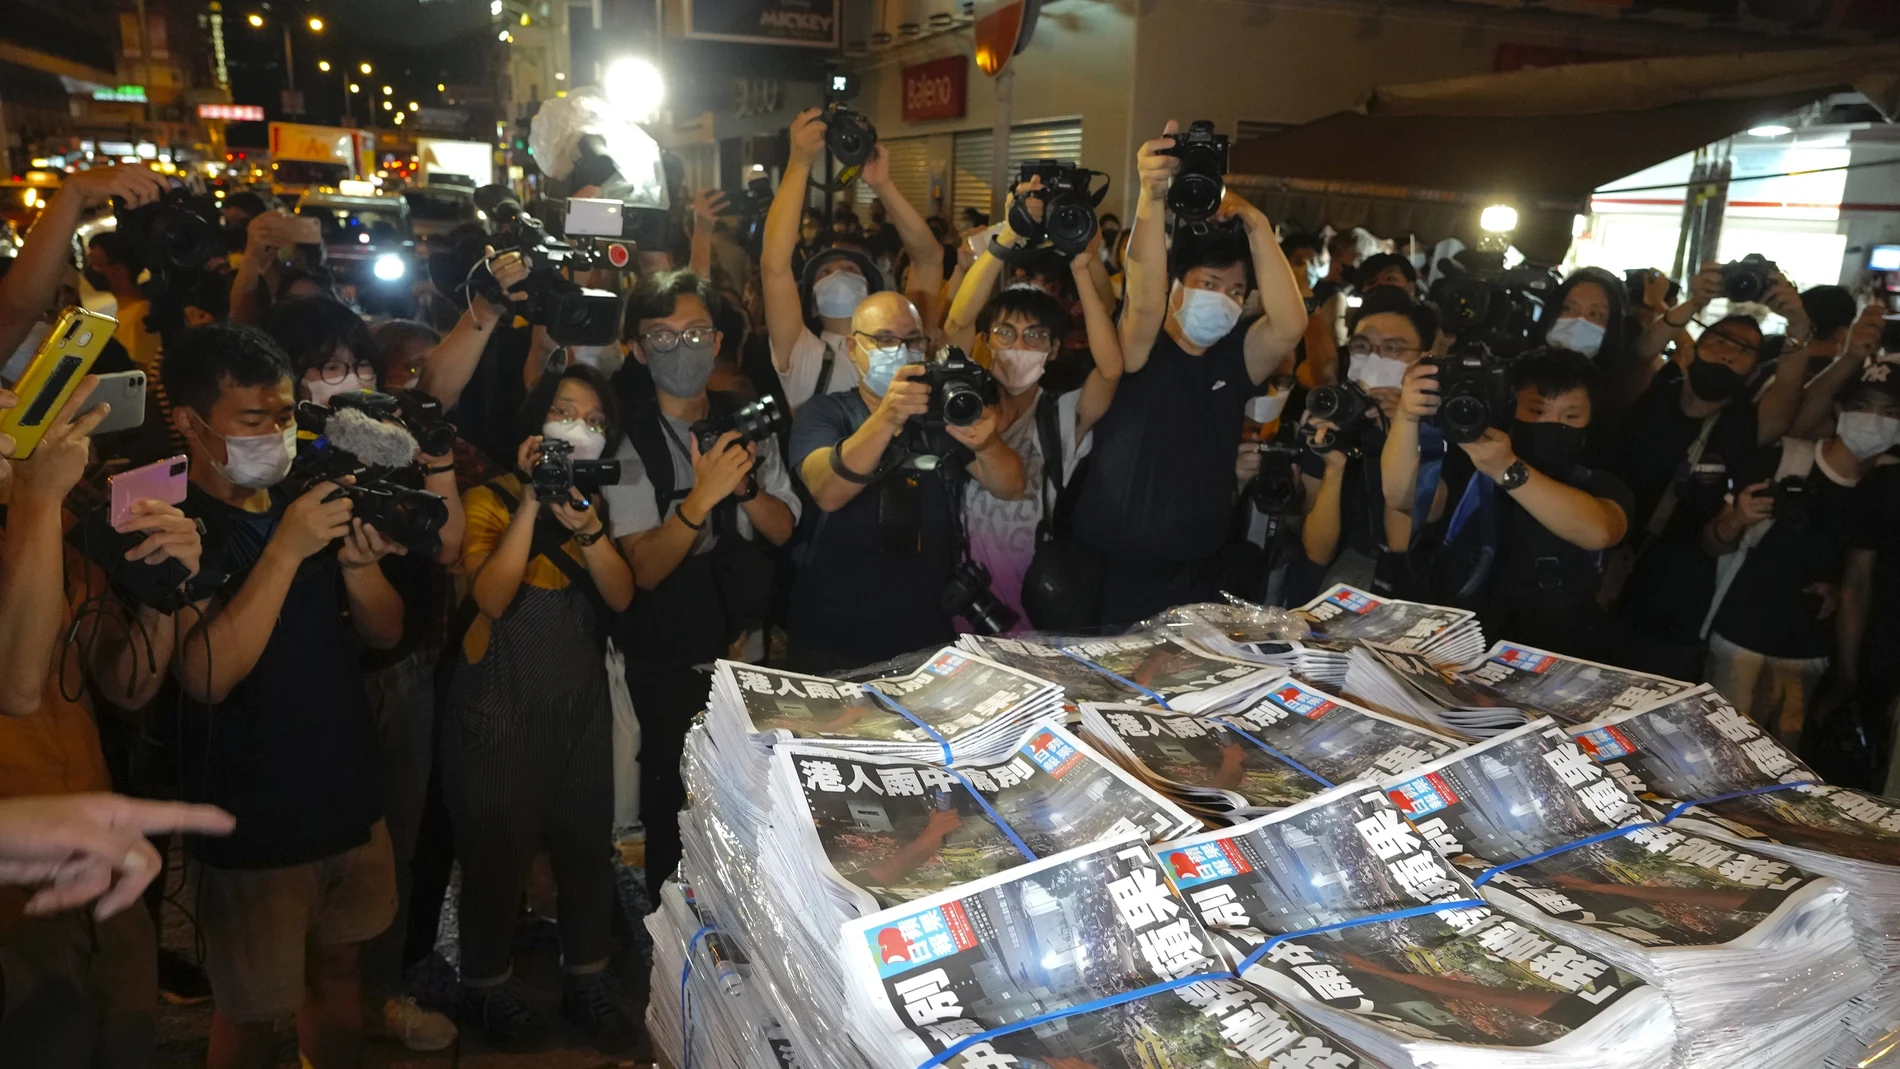 Last issue of Apple Daily arrive at a newspaper booth in Hong Kong, early Thursday, June 24, 2021. Hong Kong's pro-democracy Apple Daily newspaper will stop publishing Thursday, following last week's arrest of five editors and executives and the freezing of $2.3 million in assets under the city's year-old national security law. (AP Photo/Vincent Yu)